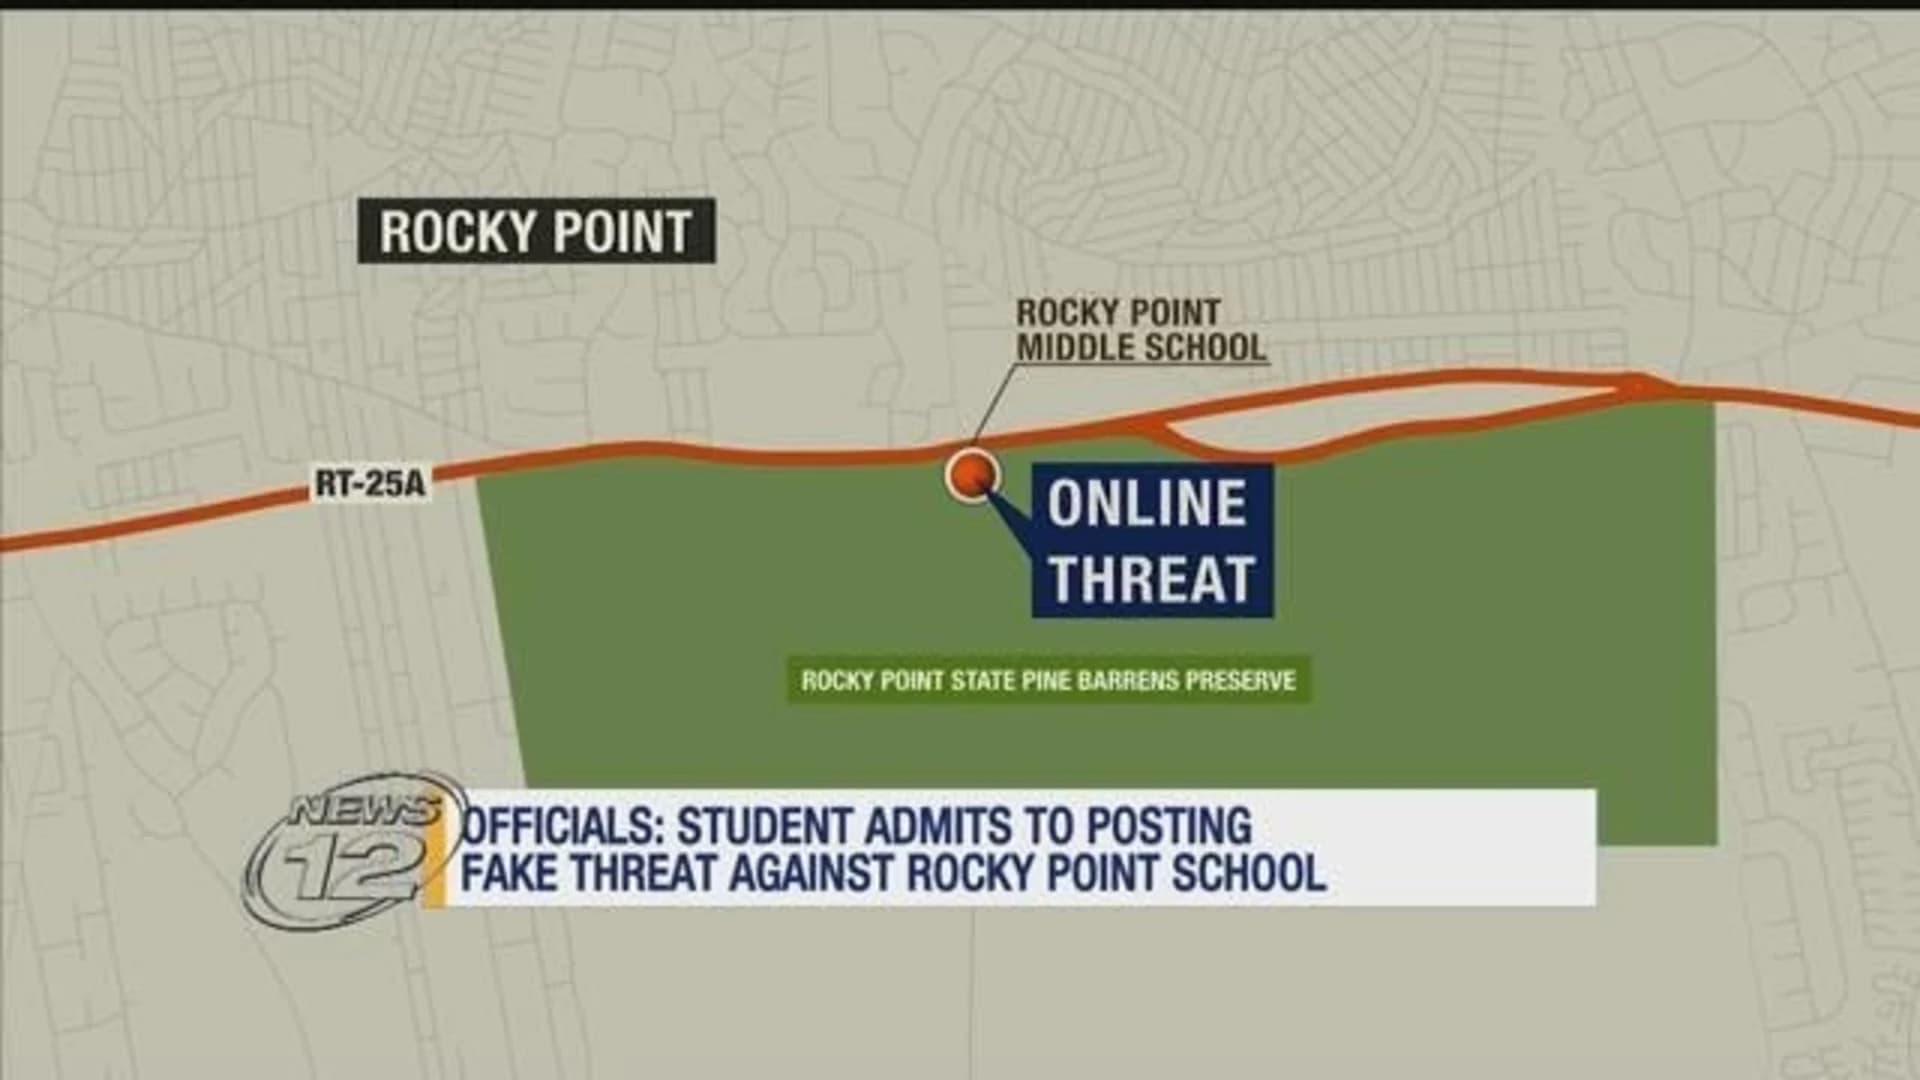 Officials: Student admits to posting fake threat against Rocky Point school